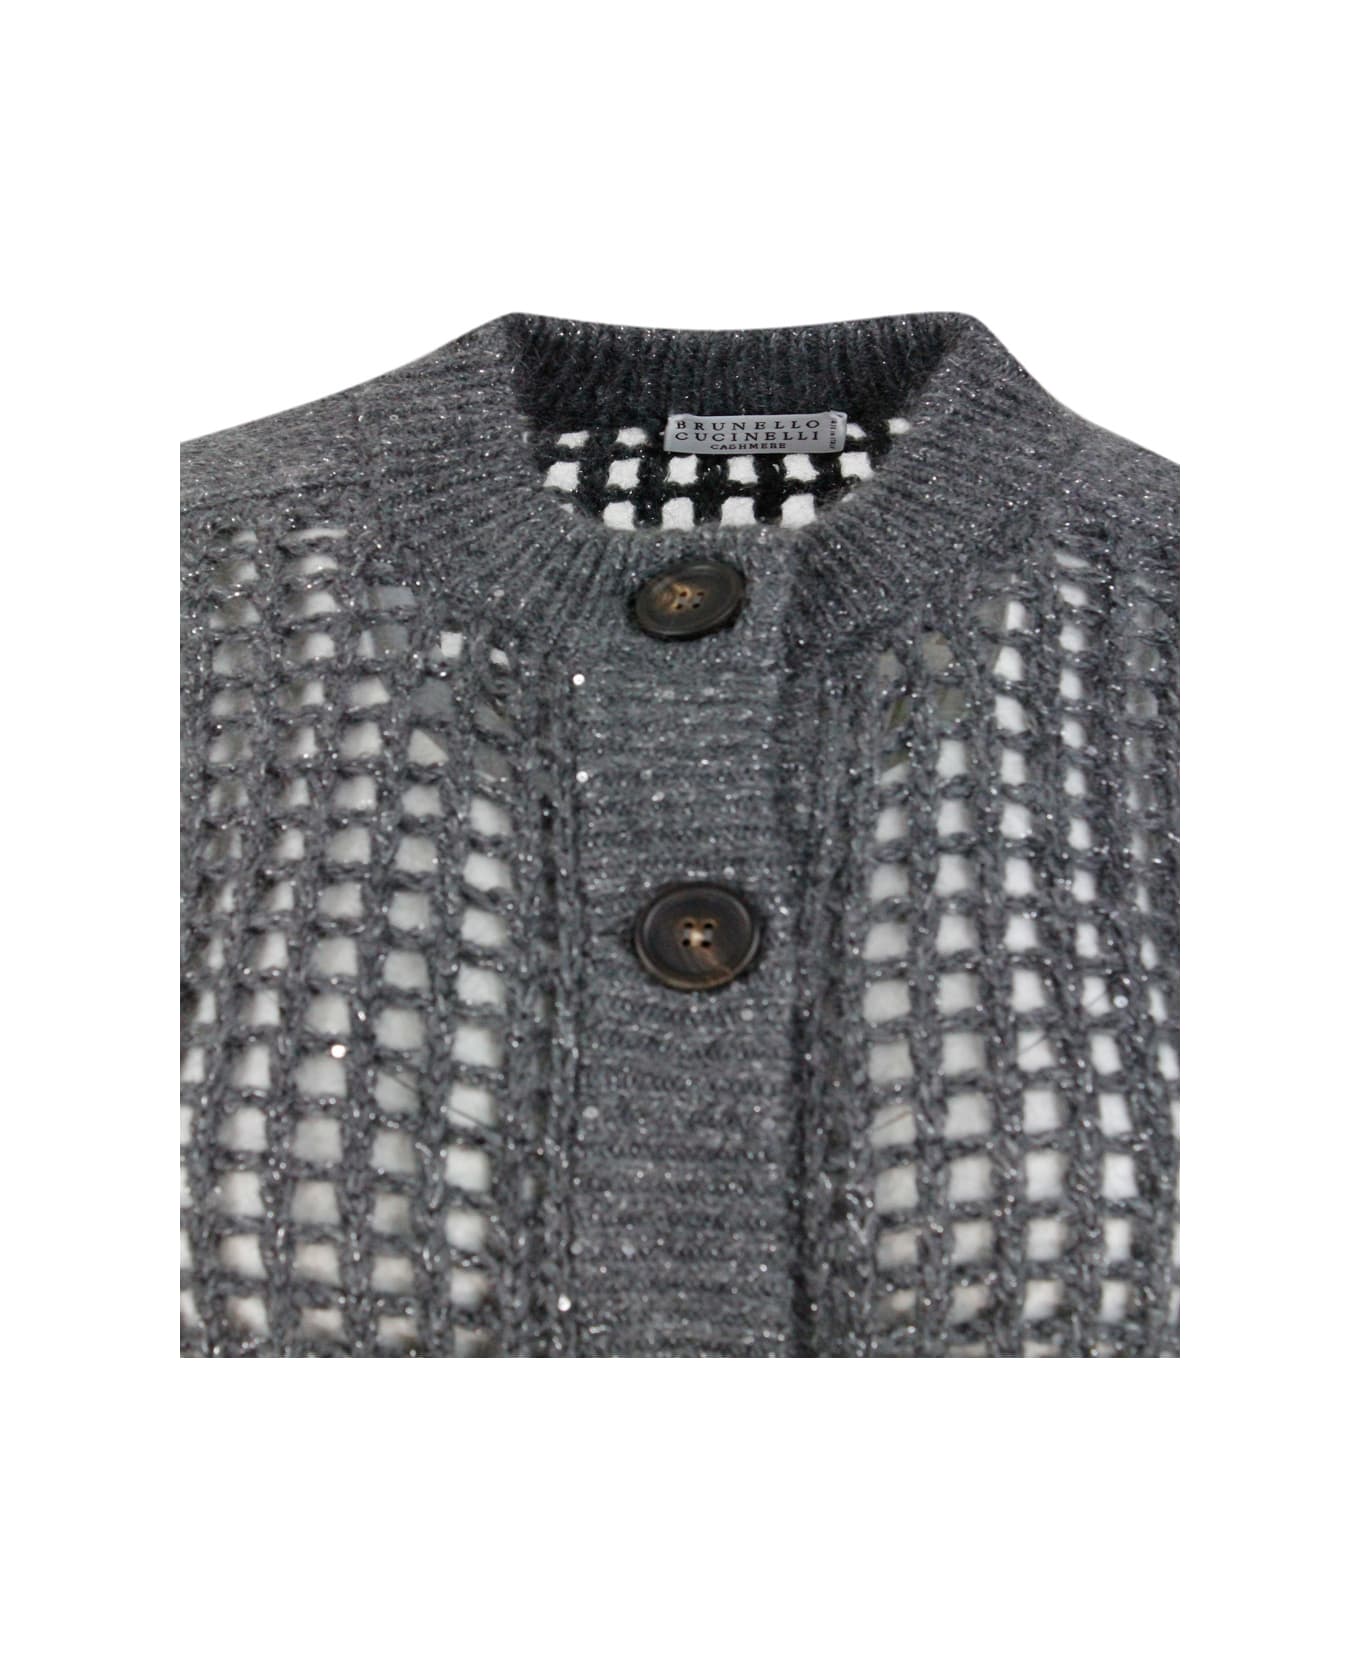 Brunello Cucinelli Long-sleeved Mesh Cardigan Sweater In Fine Wool, Cashmere And Mohair Embellished With Lamè Yarn For Shiny Reflections. Slightly Cropped Cut - Grey